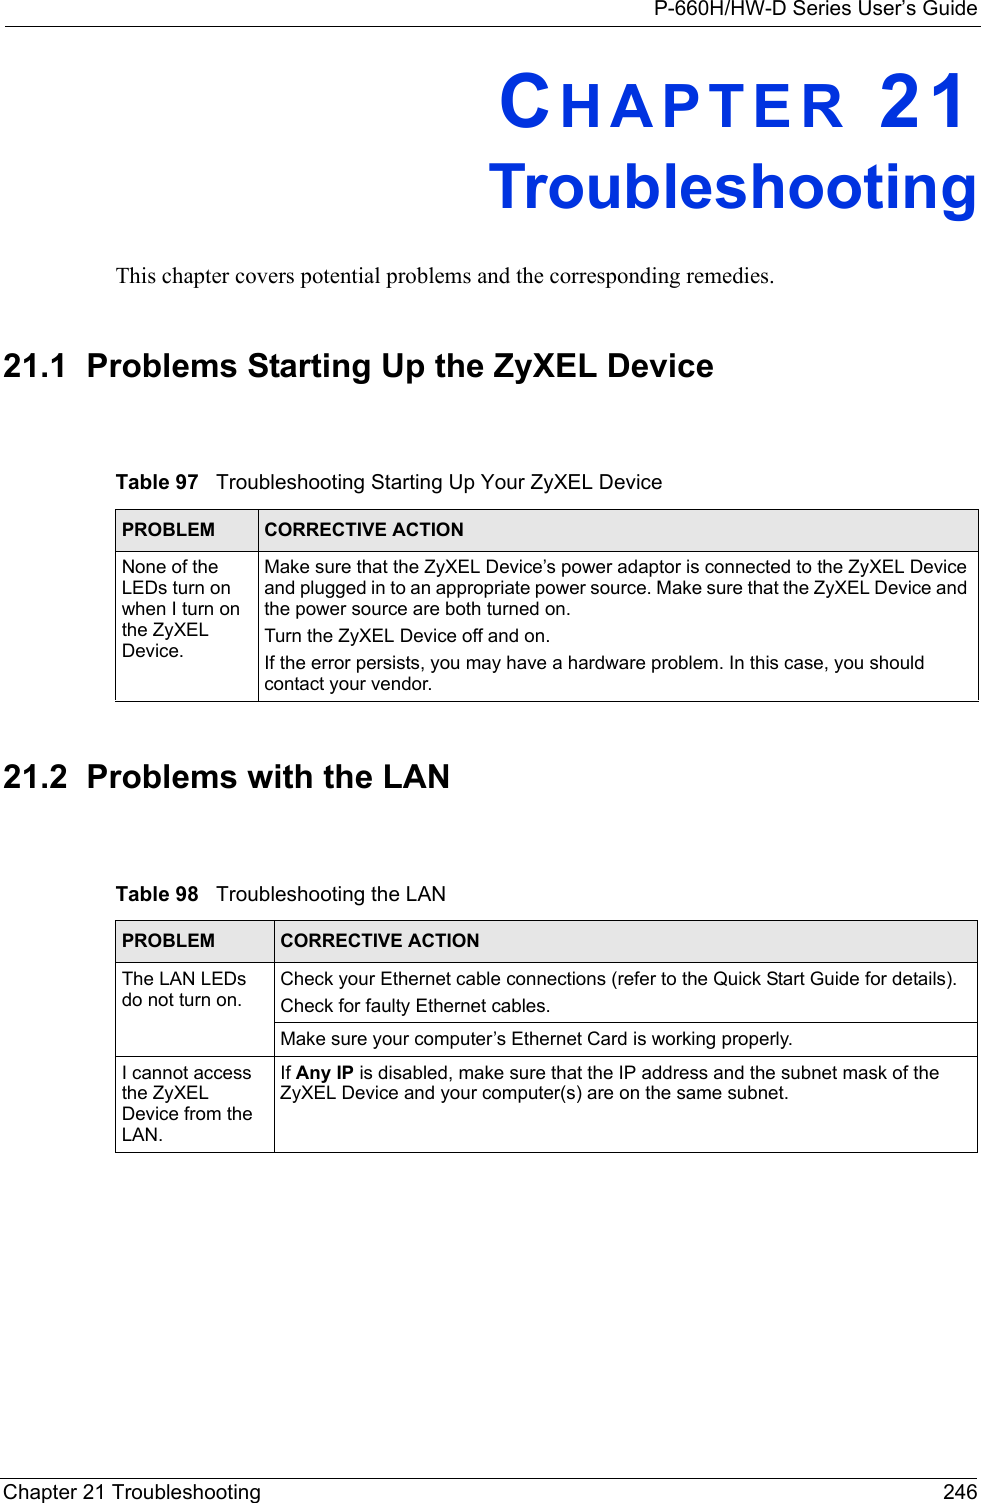 P-660H/HW-D Series User’s GuideChapter 21 Troubleshooting 246CHAPTER 21TroubleshootingThis chapter covers potential problems and the corresponding remedies.21.1  Problems Starting Up the ZyXEL Device21.2  Problems with the LANTable 97   Troubleshooting Starting Up Your ZyXEL DevicePROBLEM CORRECTIVE ACTIONNone of the LEDs turn on when I turn on the ZyXEL Device.Make sure that the ZyXEL Device’s power adaptor is connected to the ZyXEL Device and plugged in to an appropriate power source. Make sure that the ZyXEL Device and the power source are both turned on.Turn the ZyXEL Device off and on.If the error persists, you may have a hardware problem. In this case, you should contact your vendor.Table 98   Troubleshooting the LANPROBLEM CORRECTIVE ACTIONThe LAN LEDs do not turn on.Check your Ethernet cable connections (refer to the Quick Start Guide for details). Check for faulty Ethernet cables.Make sure your computer’s Ethernet Card is working properly.I cannot access the ZyXEL Device from the LAN. If Any IP is disabled, make sure that the IP address and the subnet mask of the ZyXEL Device and your computer(s) are on the same subnet.